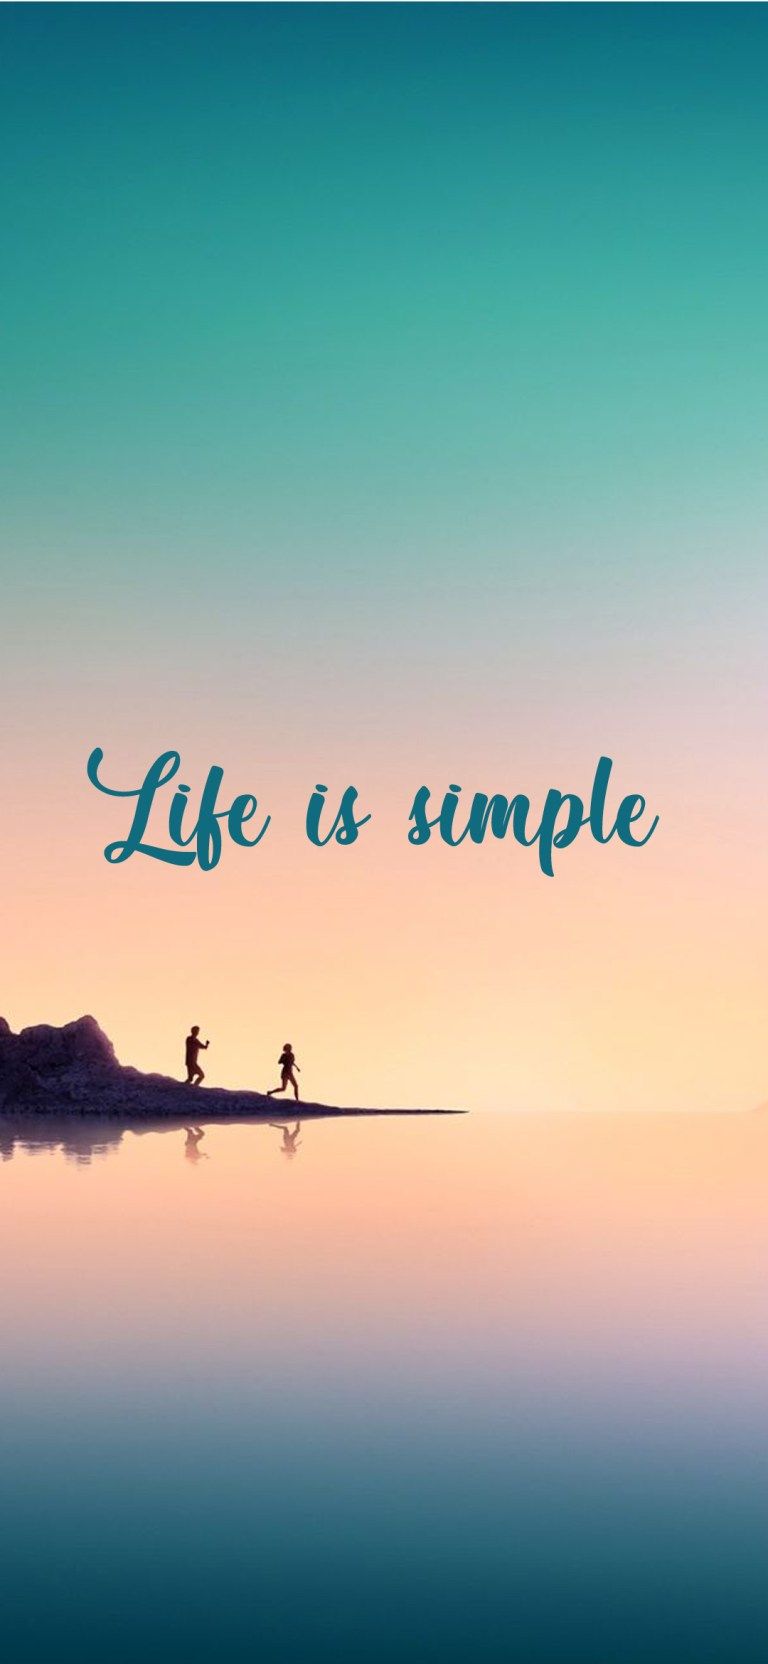 Inspirational Wallpapers for Mobile with Quotes Life is Simple 768x1664